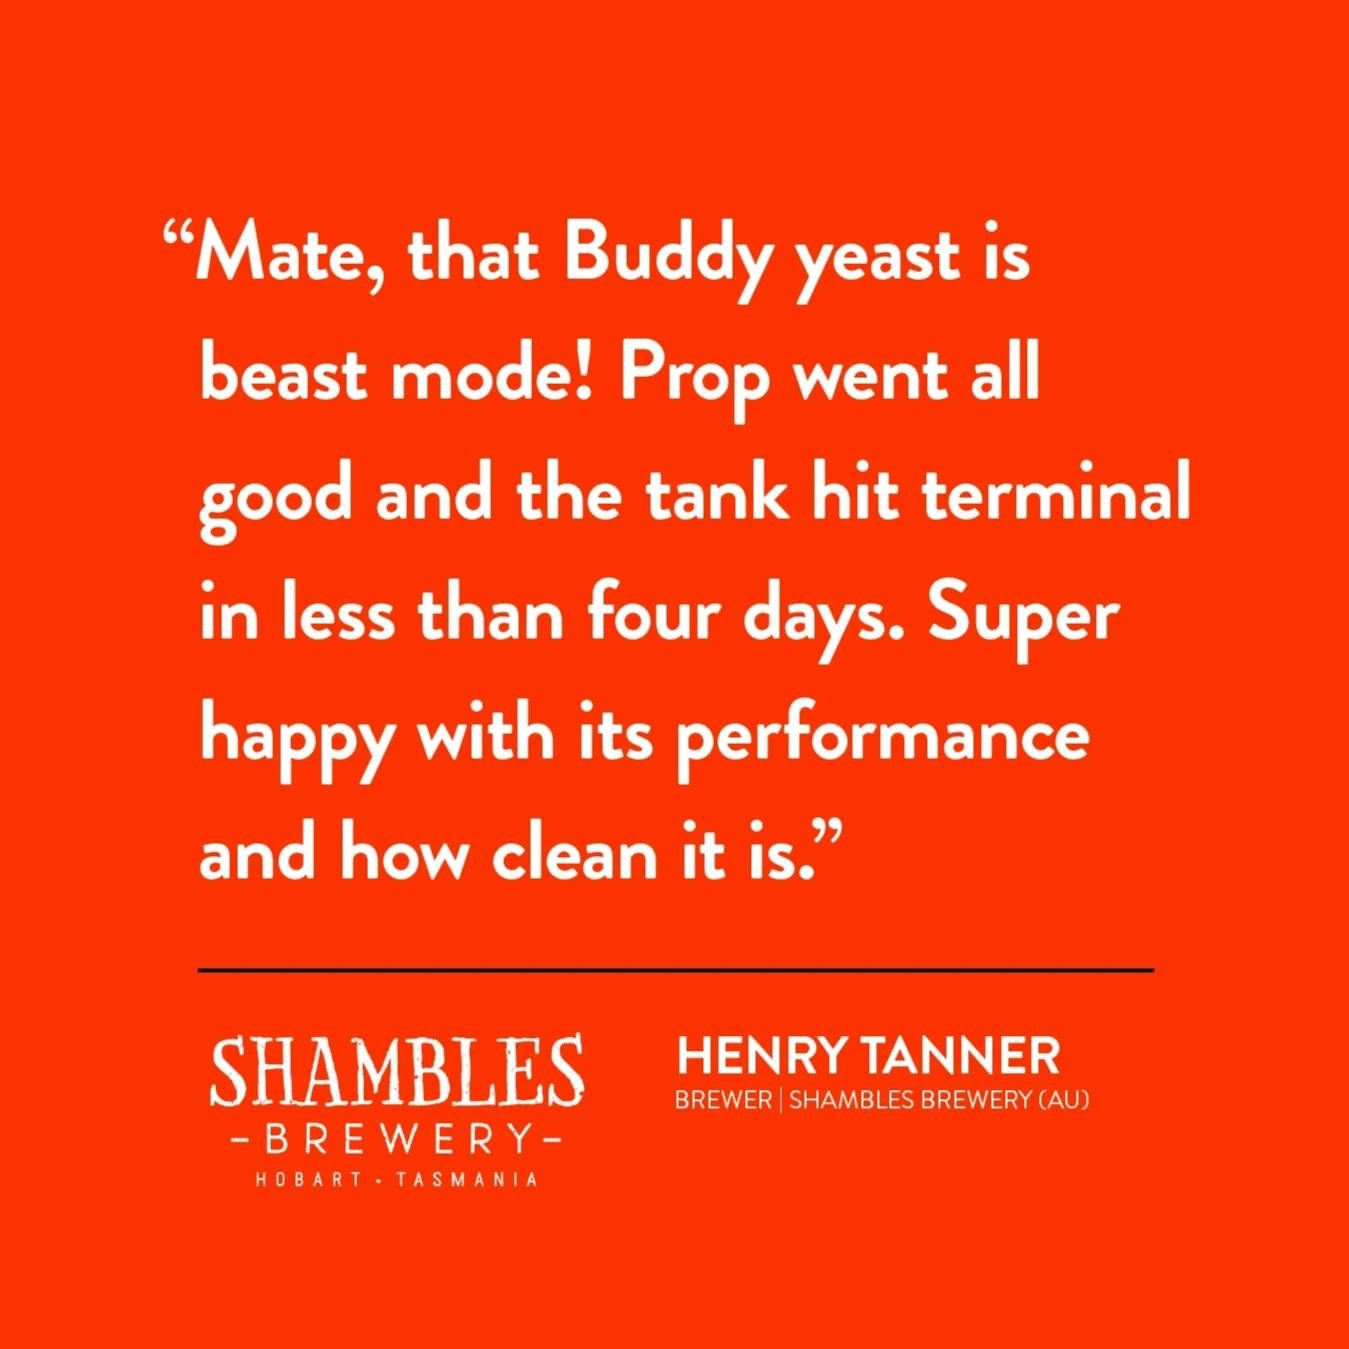 #STRAYA 🦘 Awesome feedback from over the ditch at @shamblesbrewery in Tasmania! Brewer Henry as knocked through some tasty brewskis including a Summer Ale and an IPA with our American Ale strain: Buddy 🤙 Our international express courier service me